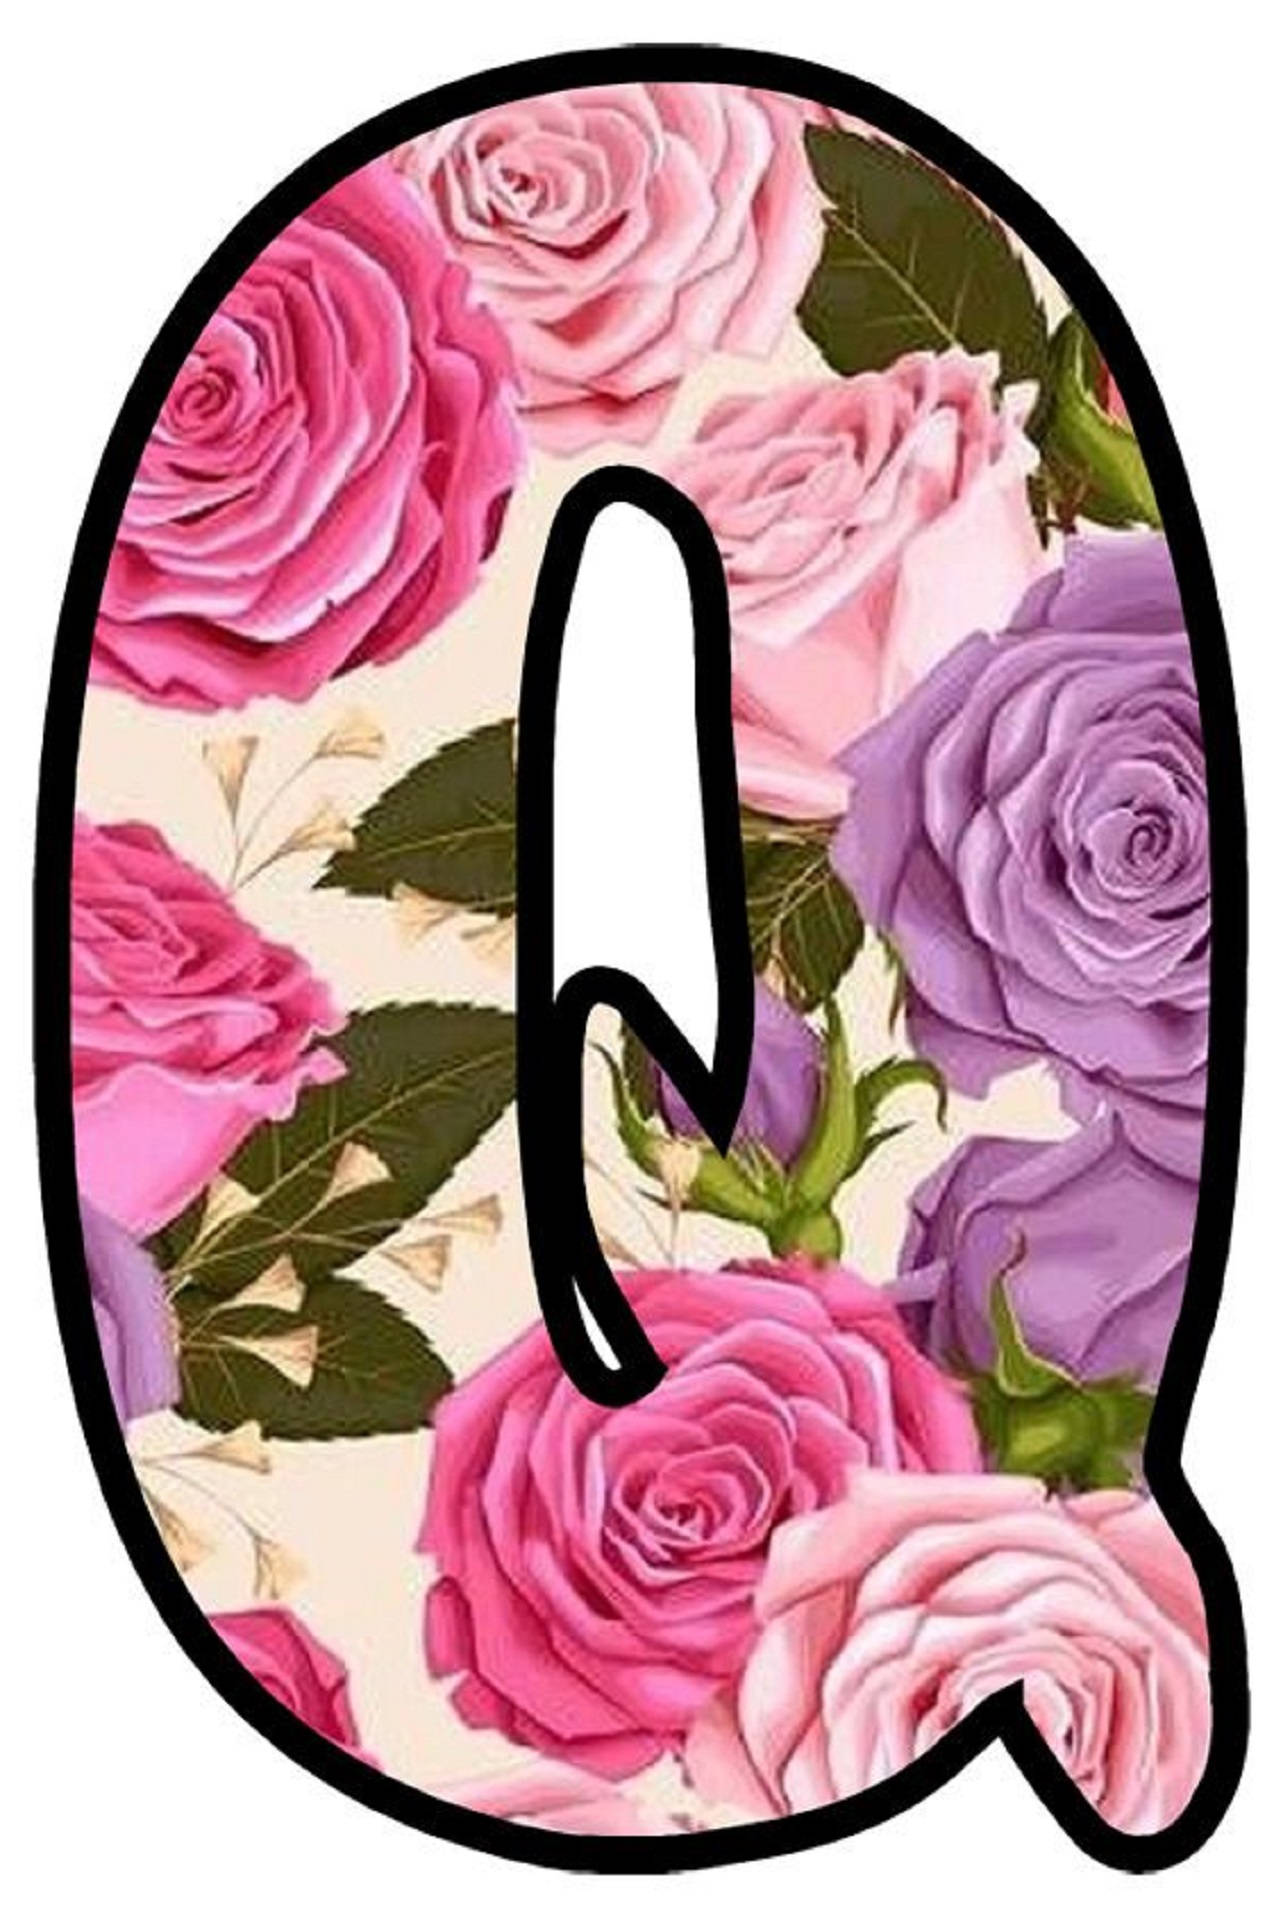 Letter Q With Roses Wallpaper